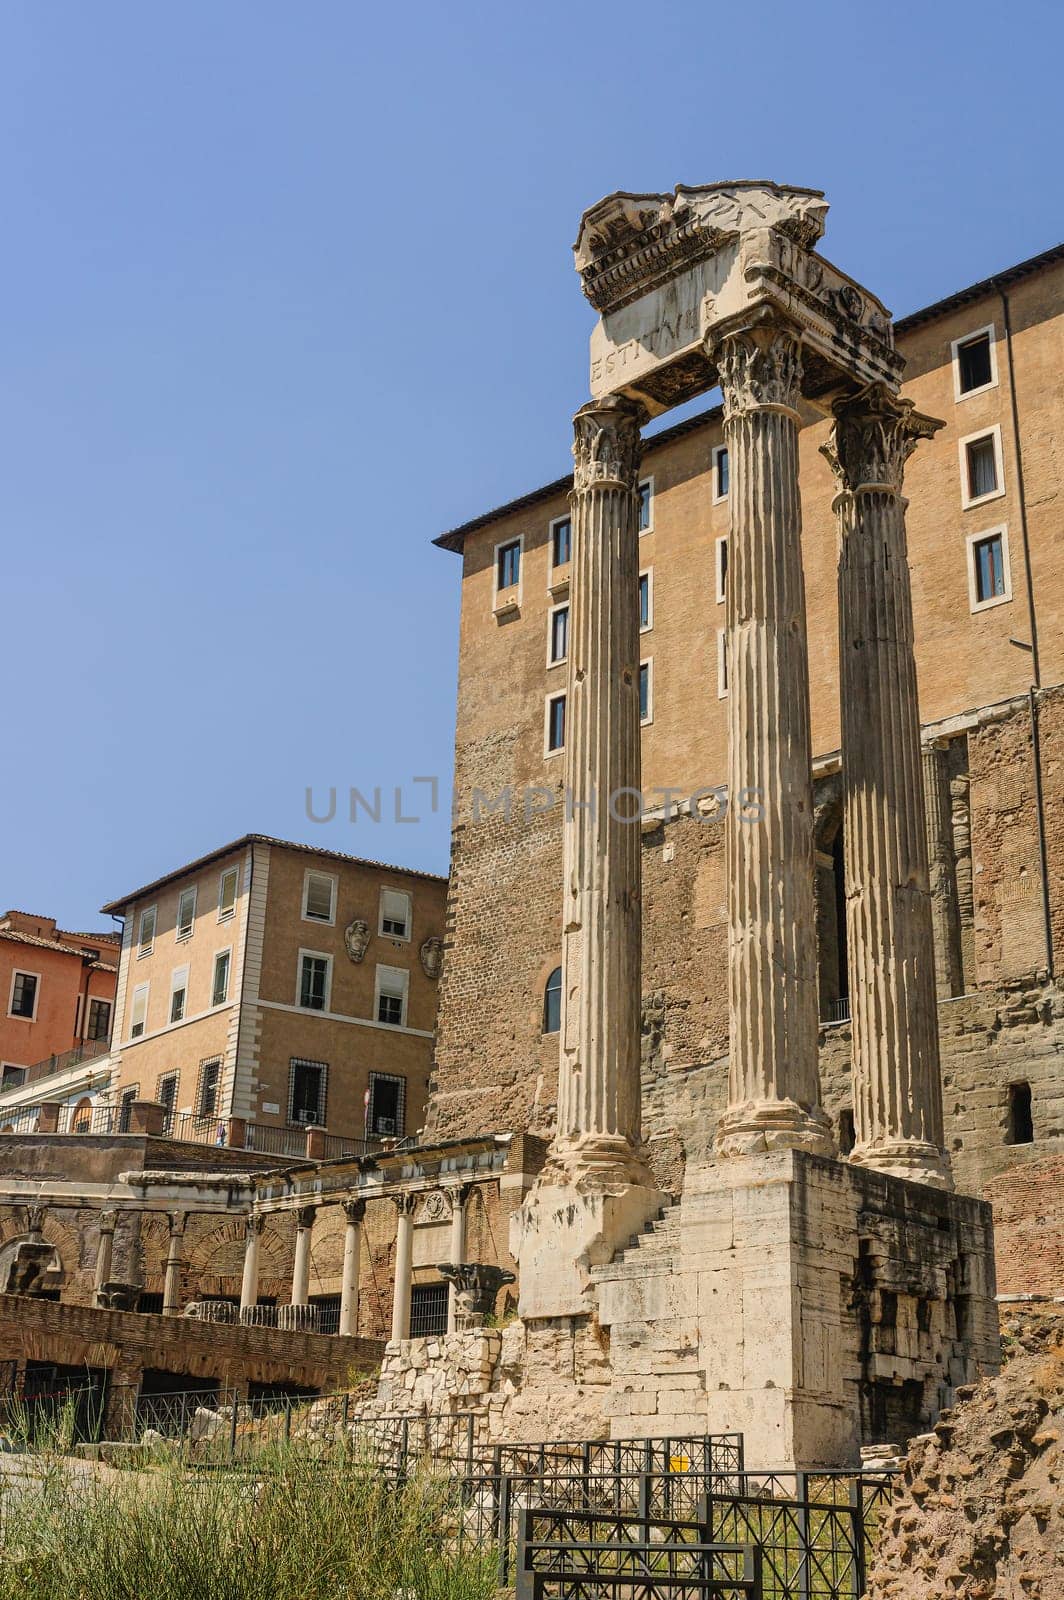 Temple of Vespasian and Titus in the Roman Forum by ivanmoreno